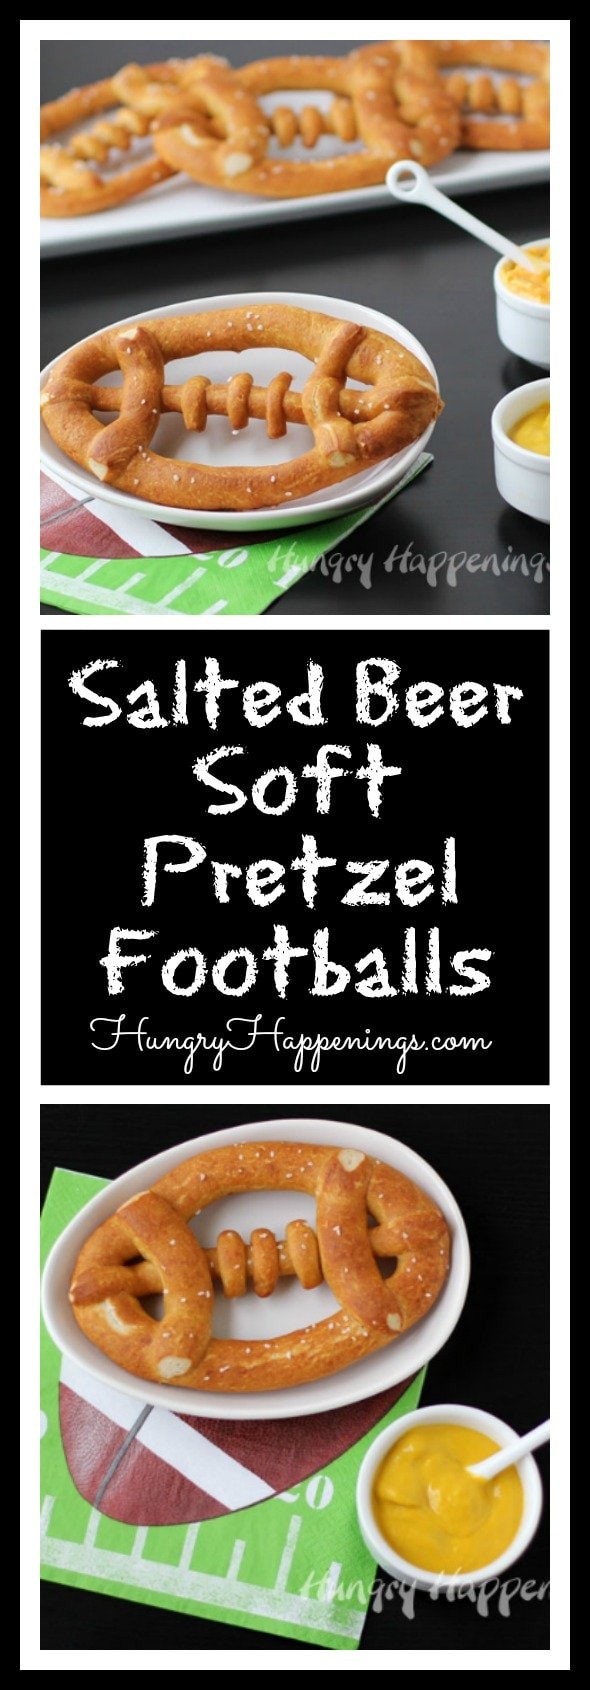 Personally, I LOVE soft pretzels and they are and always will be my soul mate. So trust me when I say these Salted Beer Soft Pretzel Footballs are a must have for any Super Bowl party.